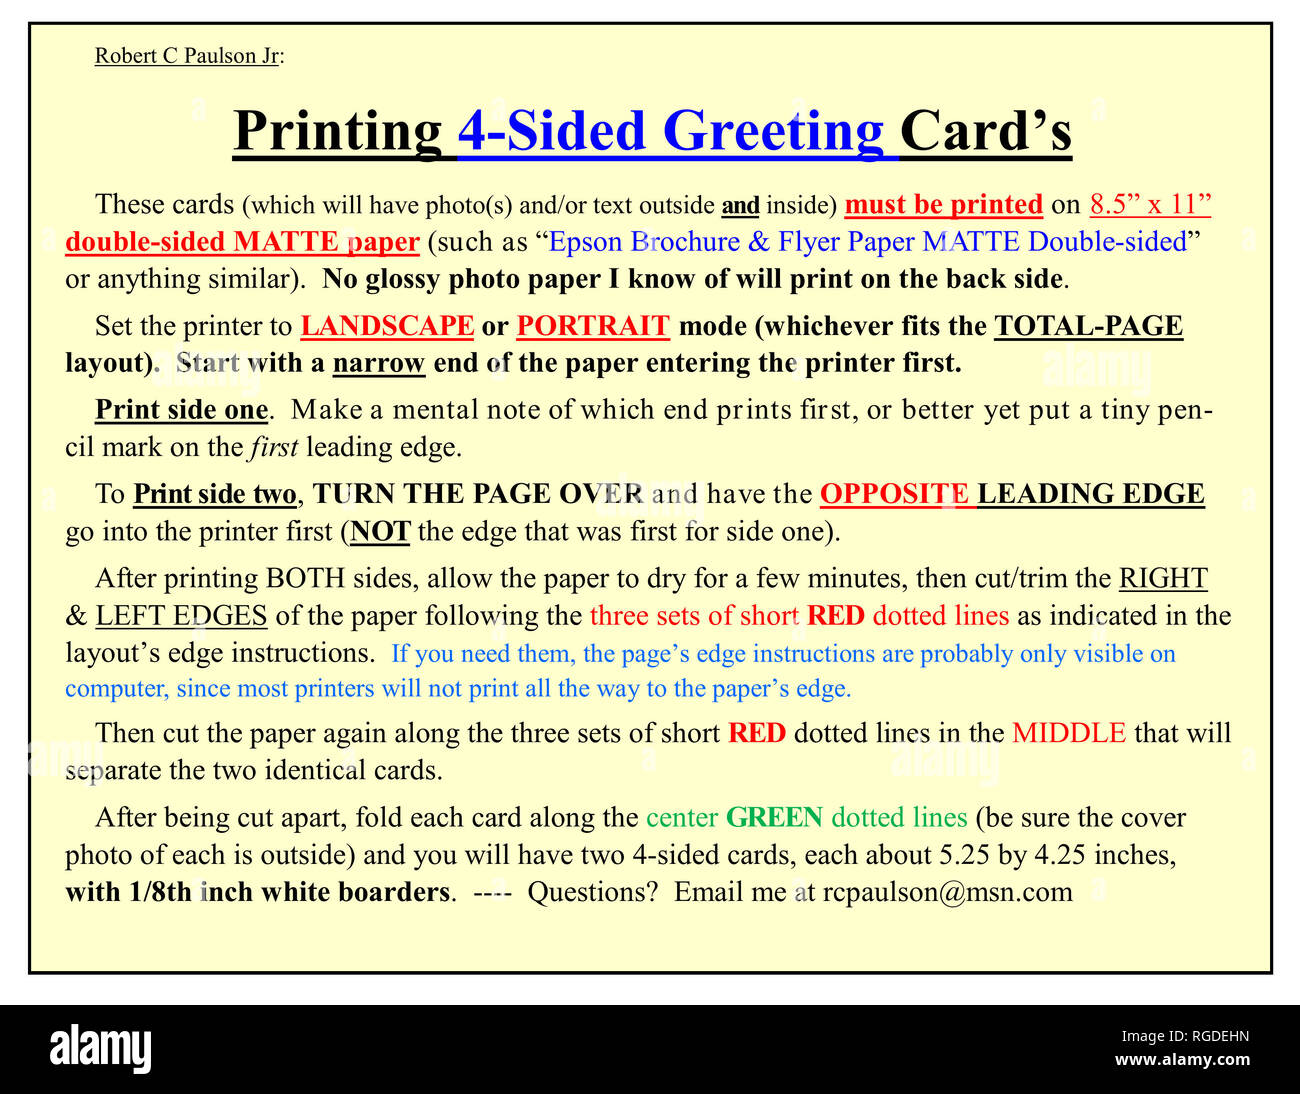 How to PRINT, CUT, and FOLD Robert C Paulson Jr's 4-sided photo greeting cards. Stock Photo